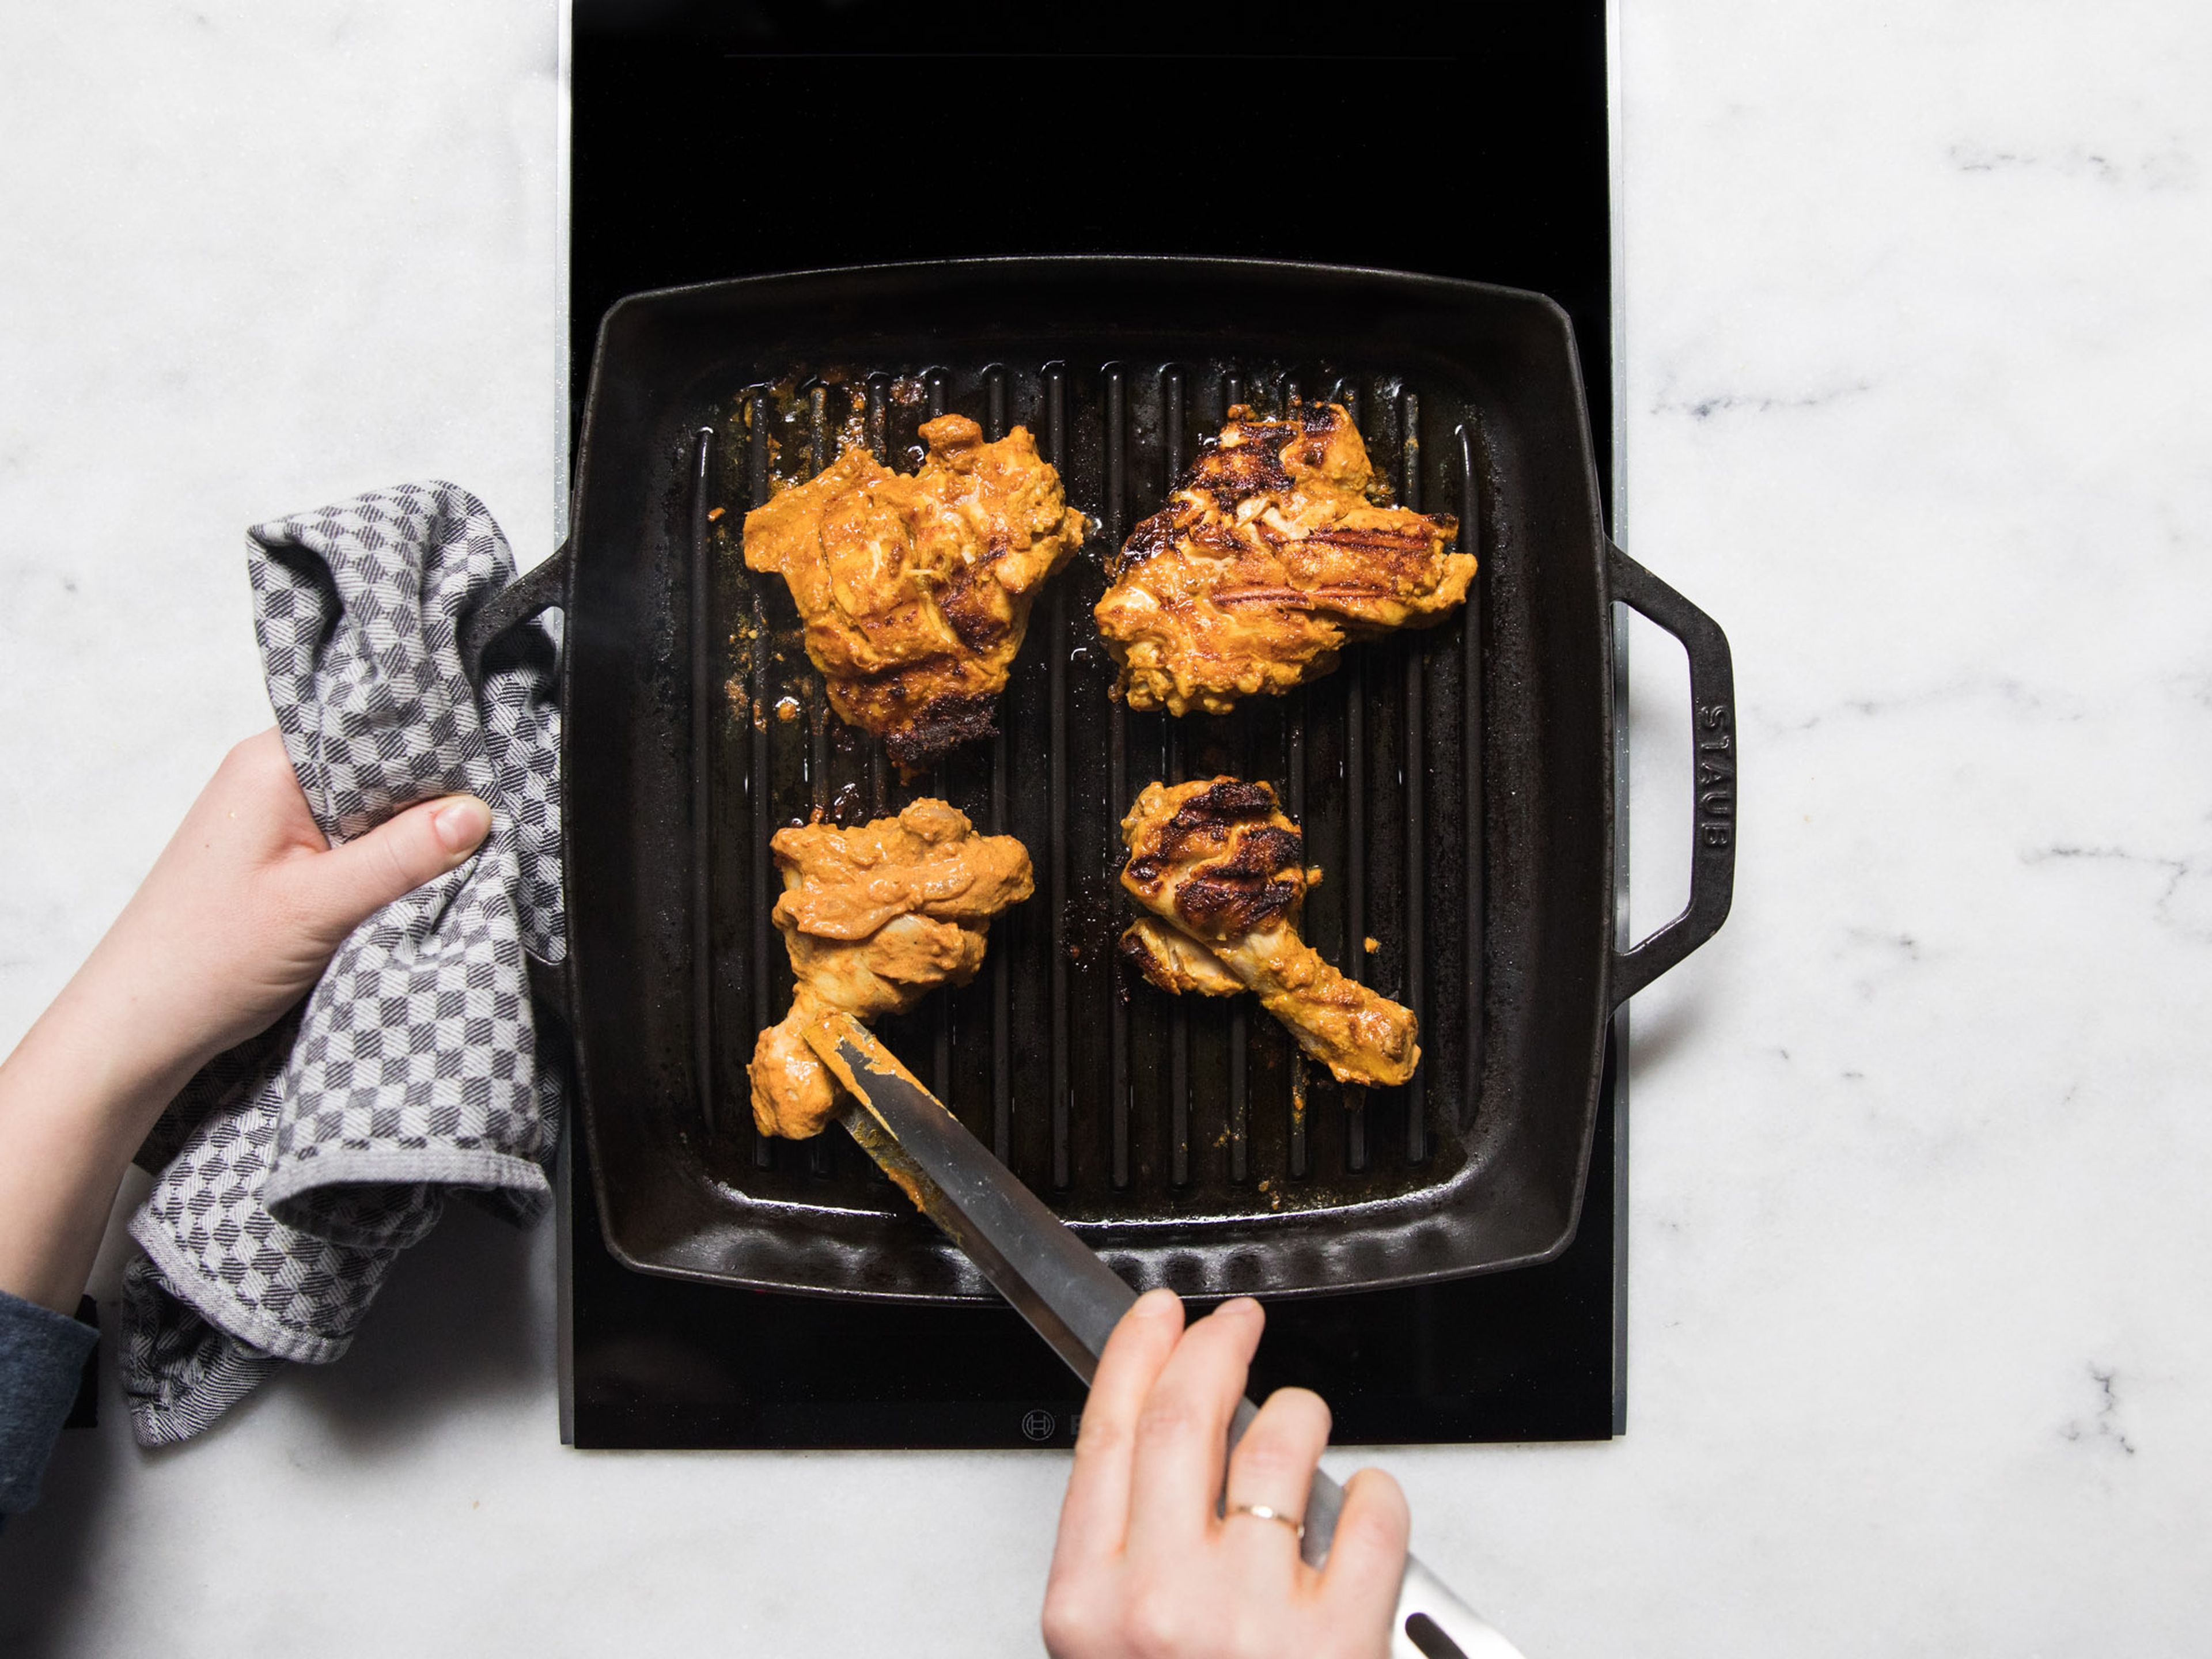 Remove chicken from the fridge and allow to warm up to room temperature. Heat ghee in a grill pan and fry chicken for 6 – 7 min. on each side, until lightly charred and cooked through. Serve with naan bread and raita. Enjoy!